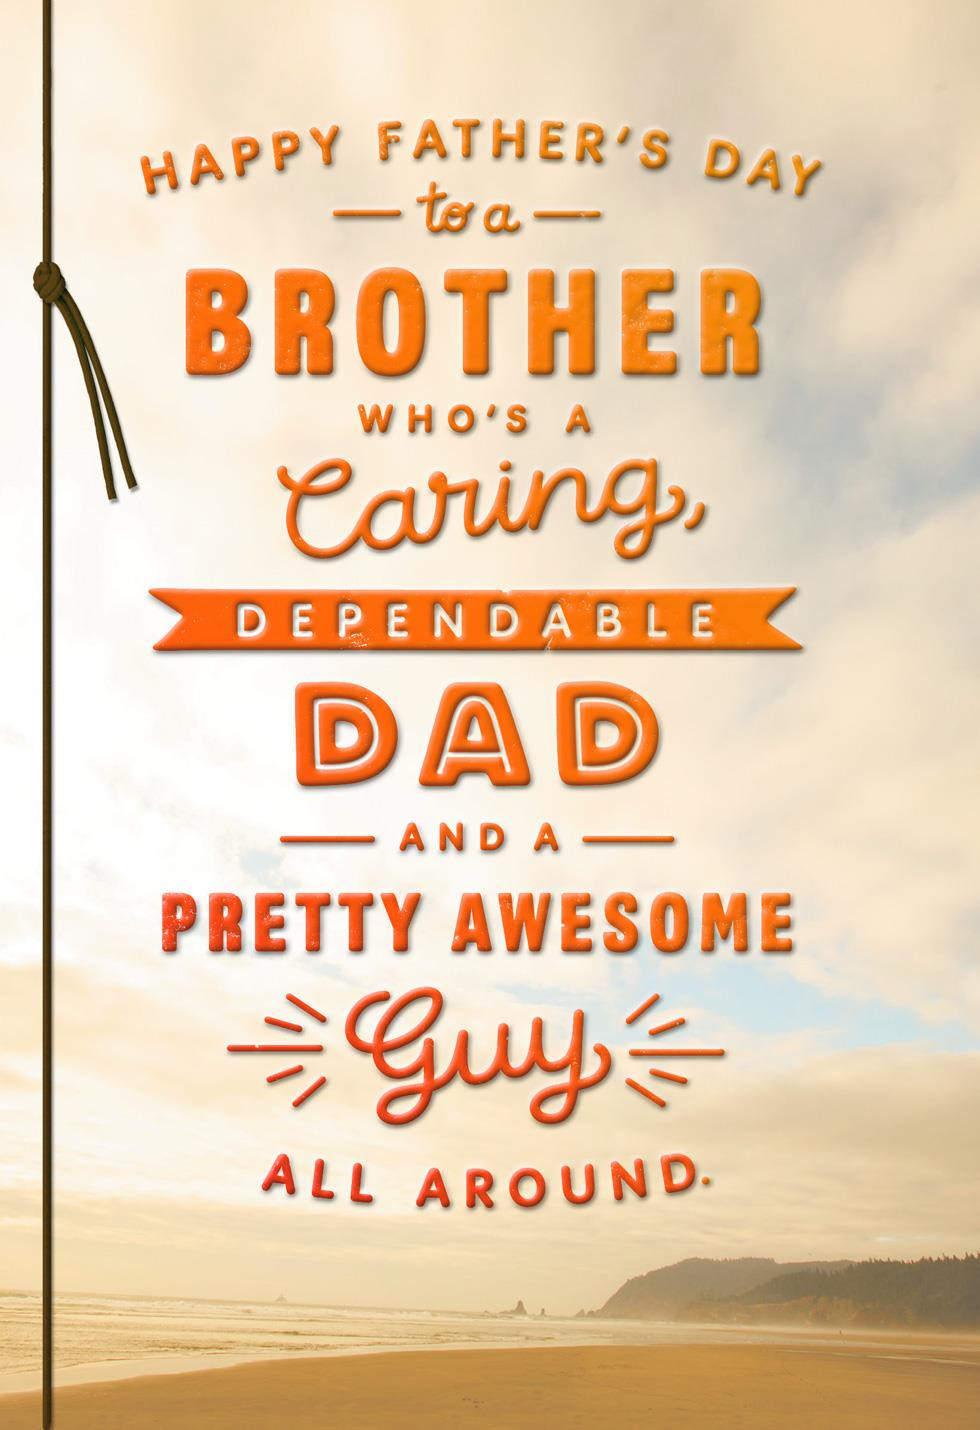 Happy Fathers Day Brother Quotes
 Awesome Guy Father s Day Card for Brother Greeting Cards